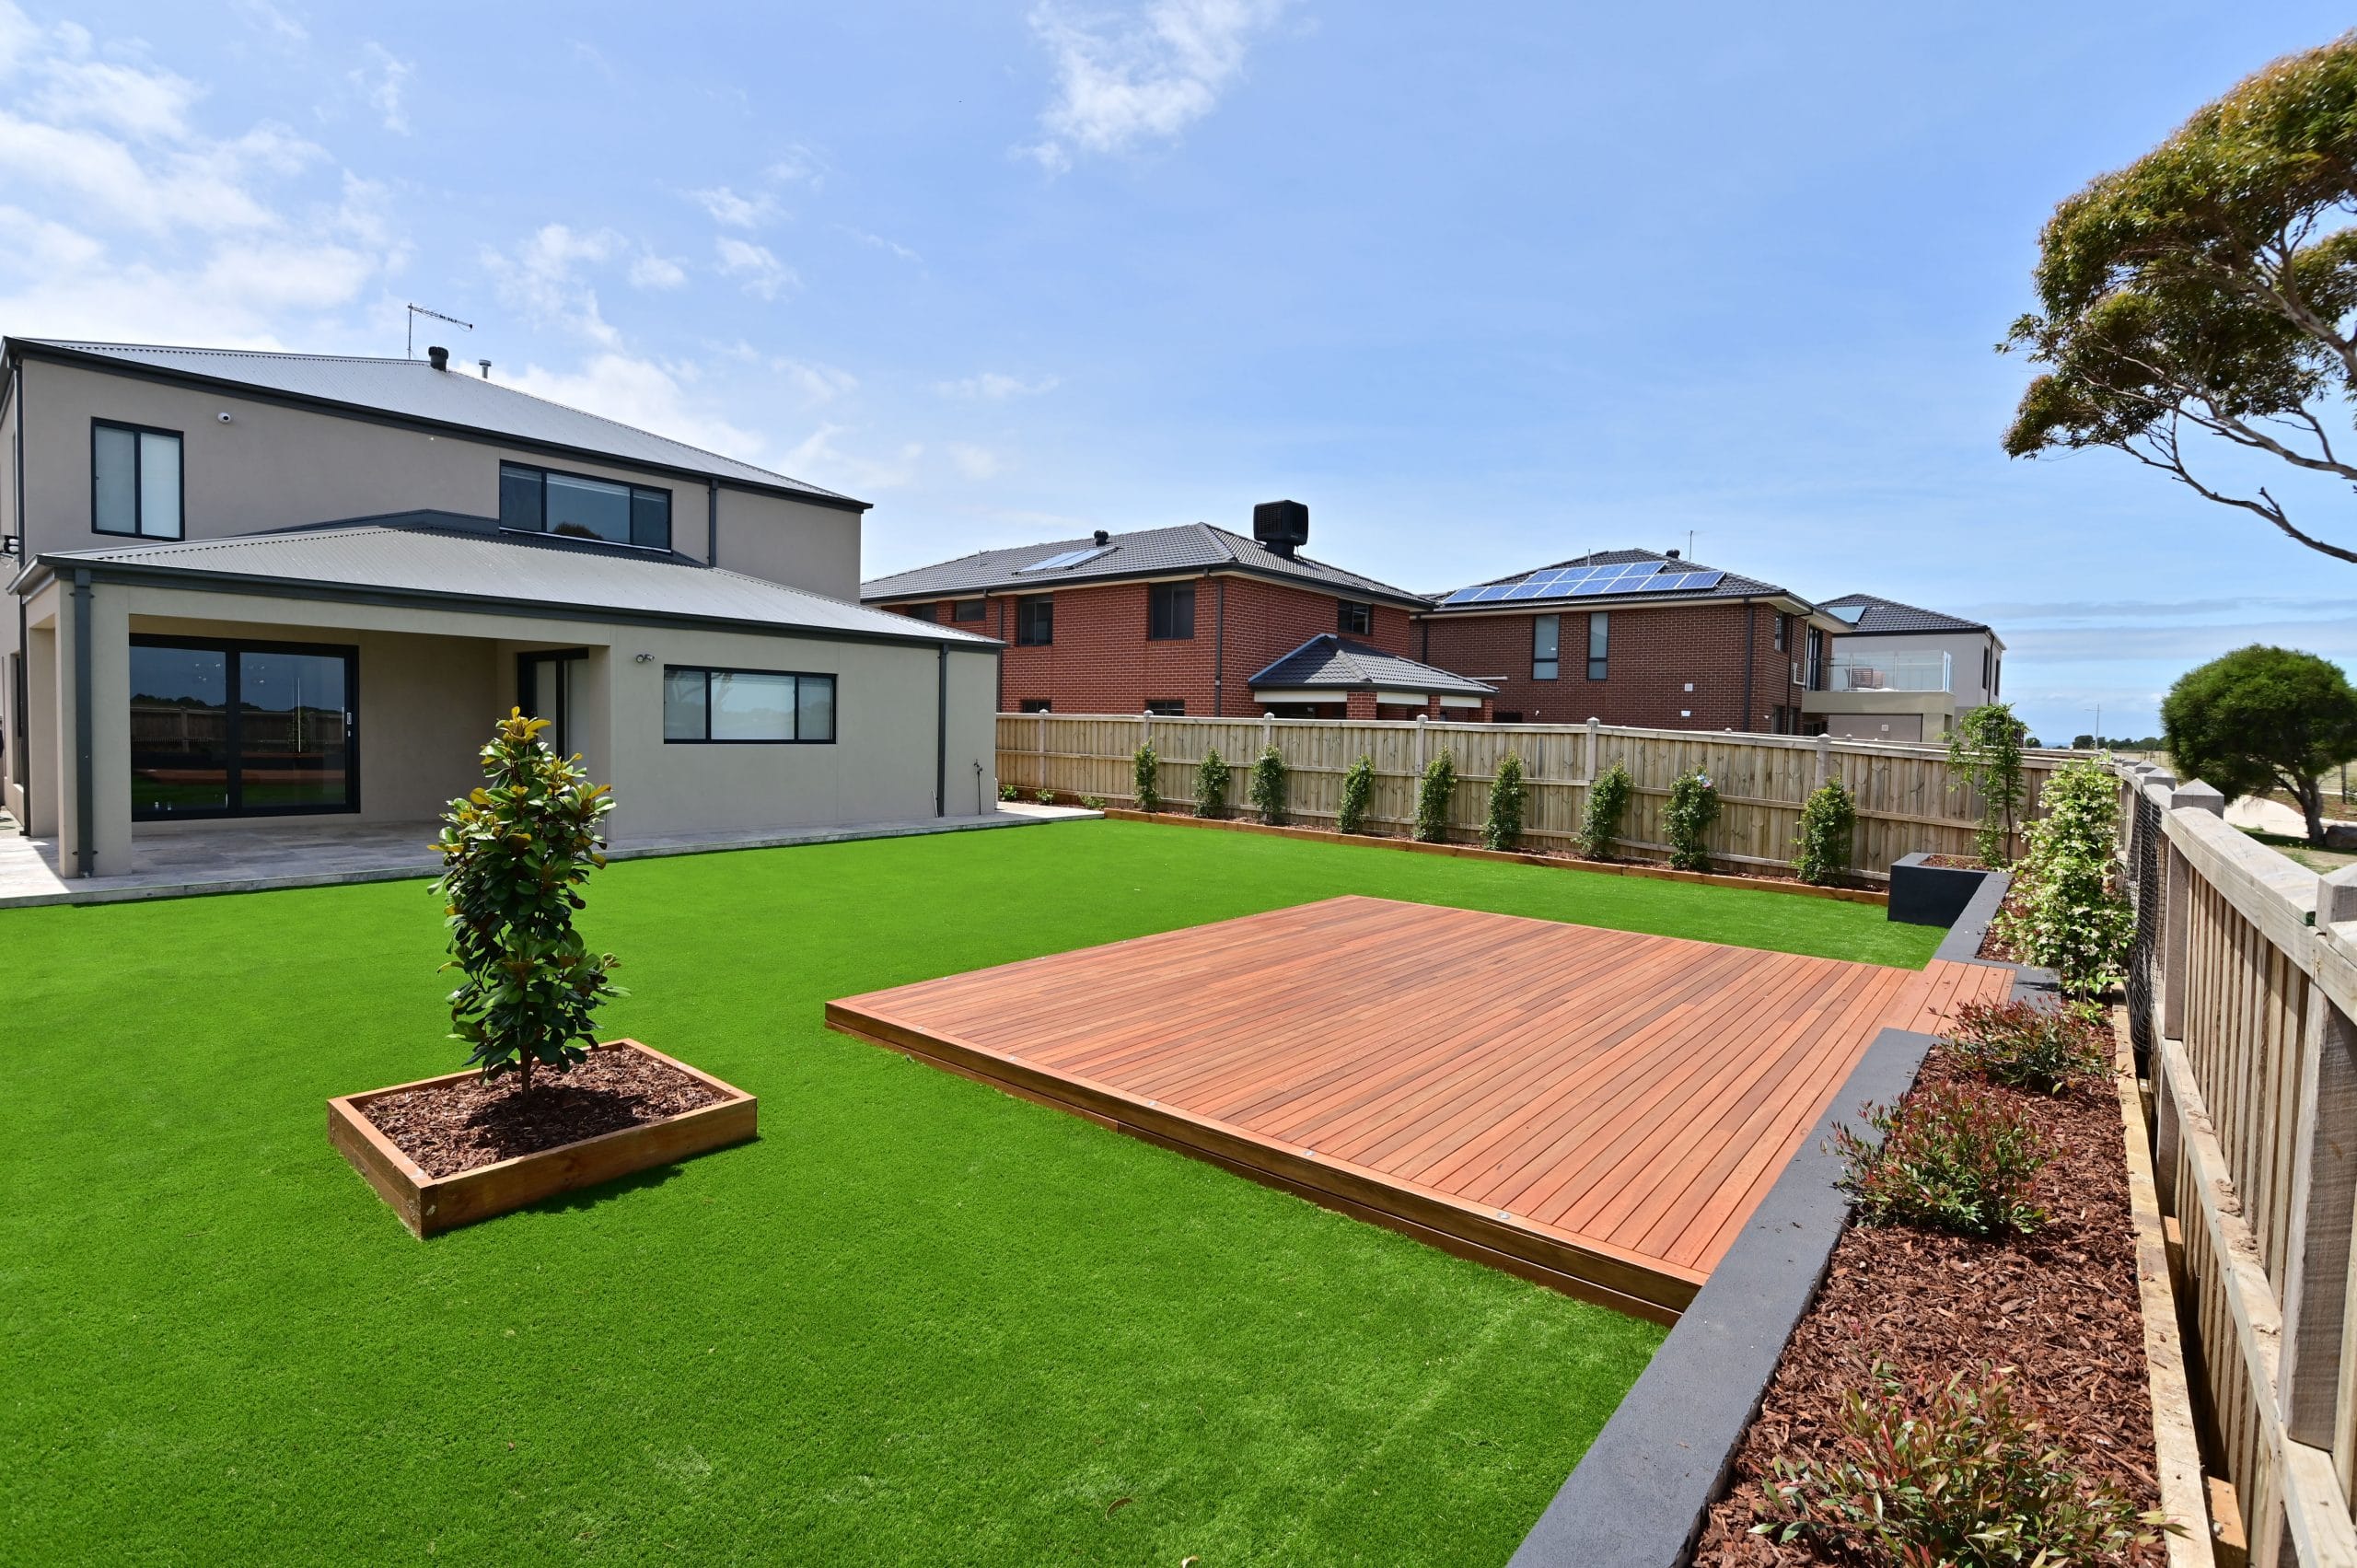 L267 - Point Cook - Corner point of view, grass and patio